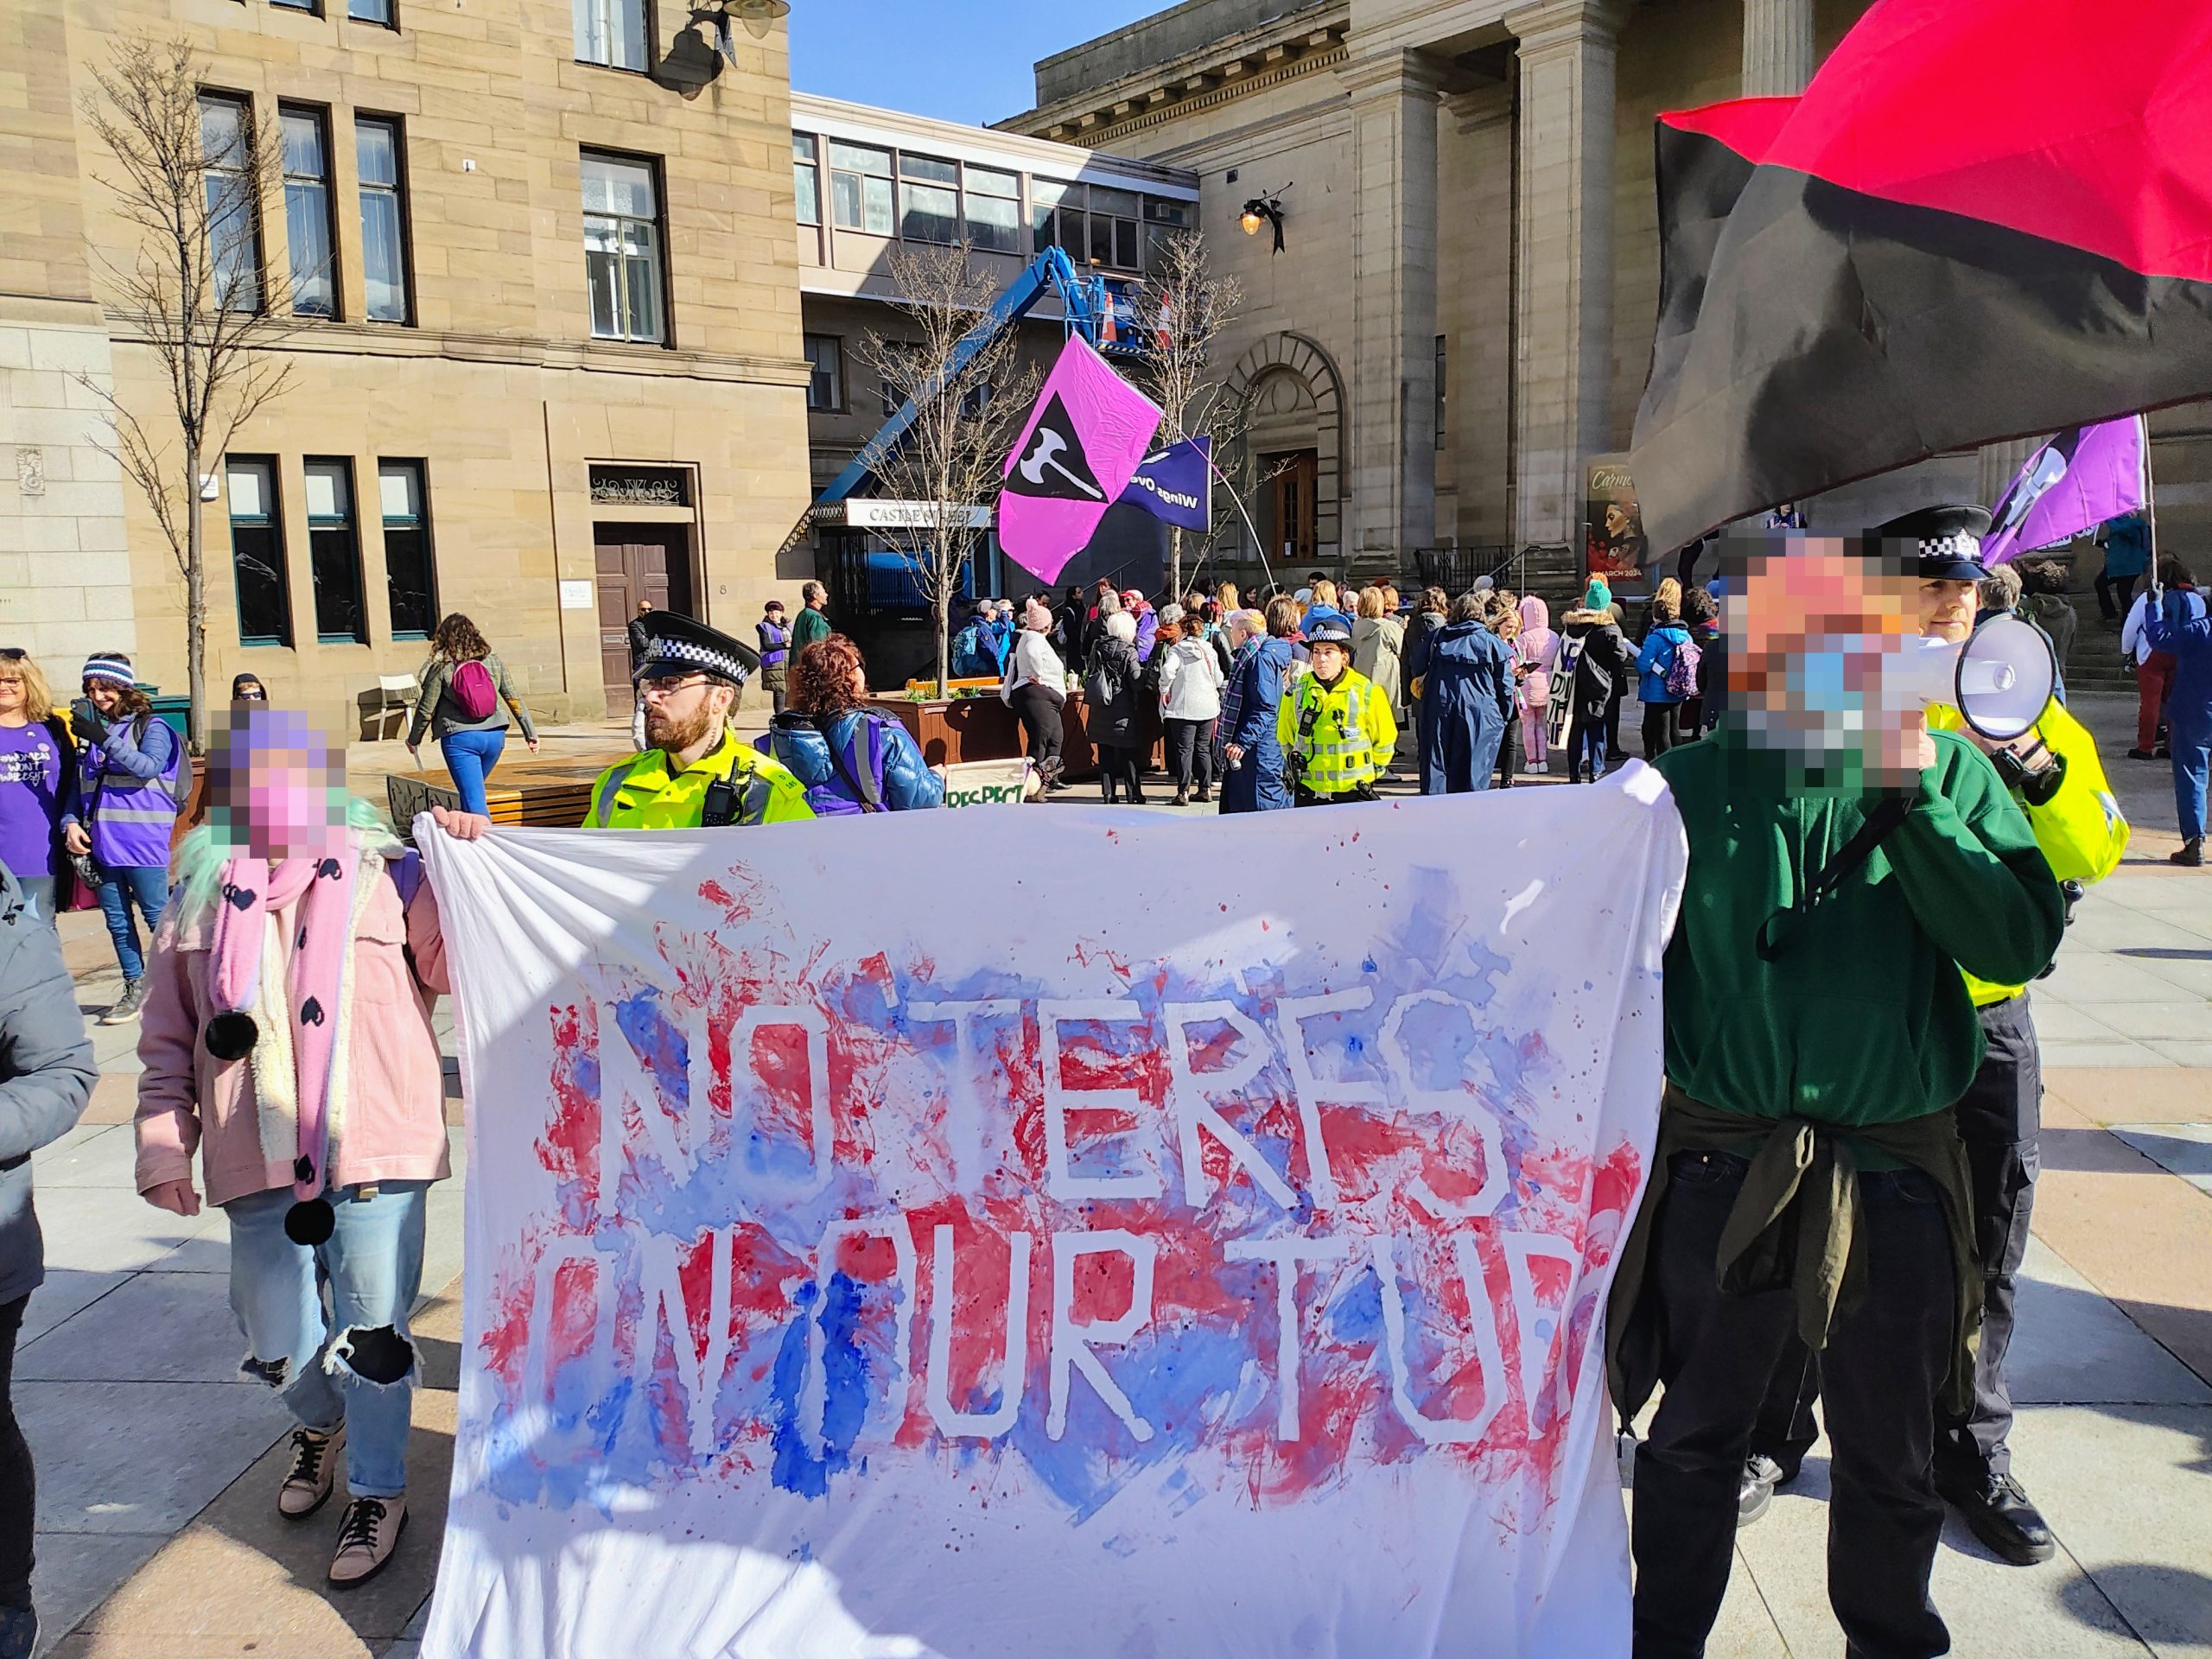 Anti-trans campaigners sent packing in Dundee